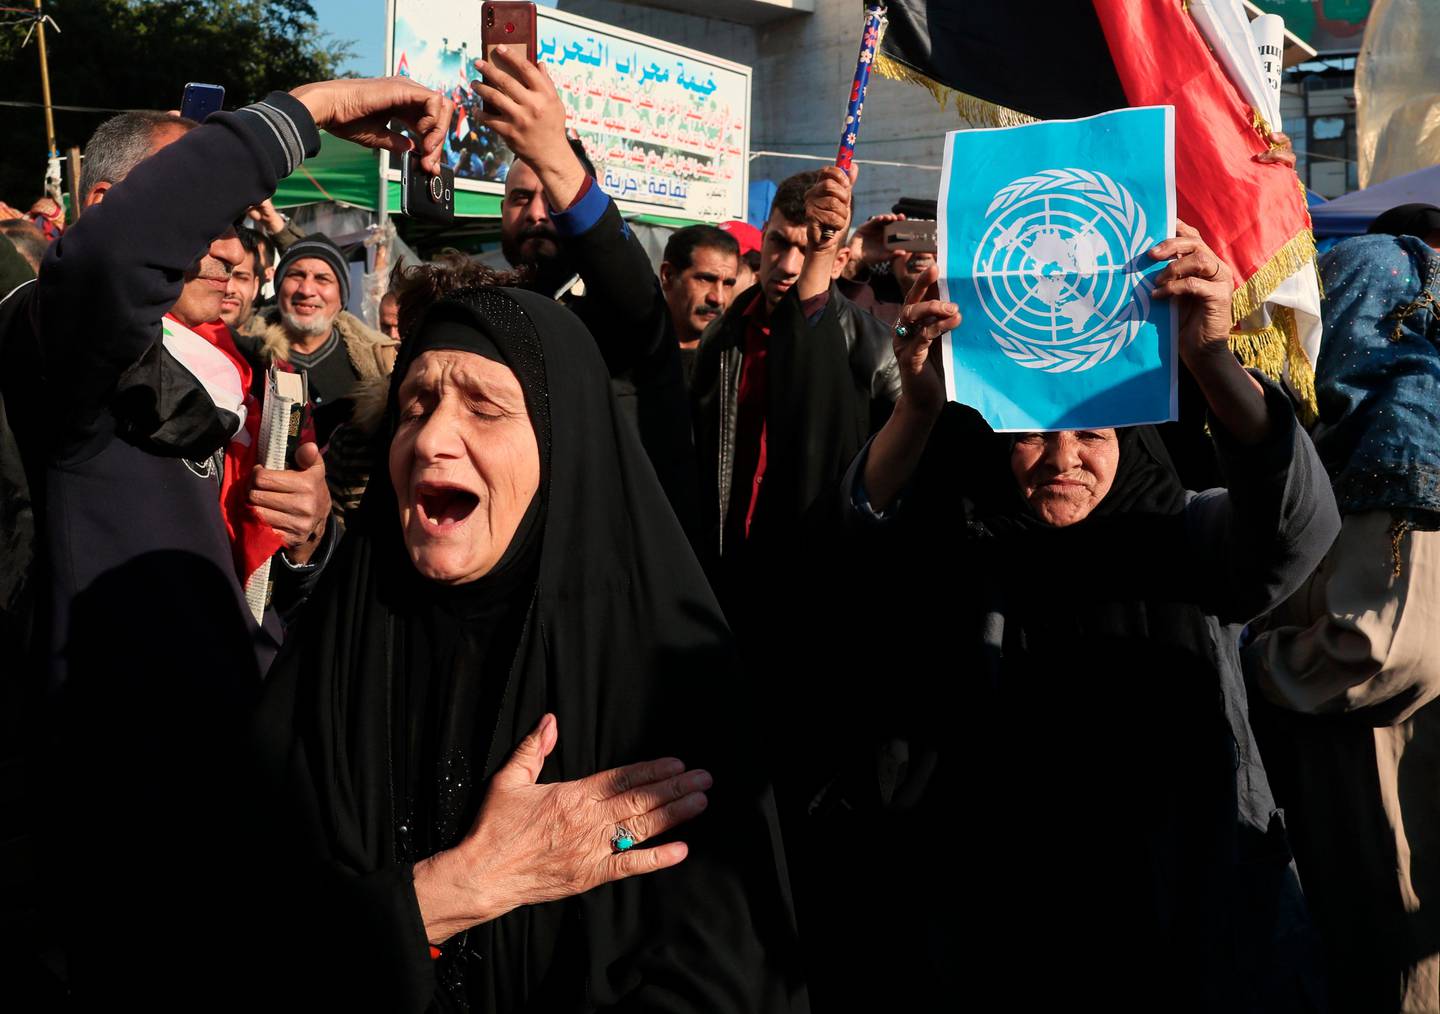 Anti-government protesters chant slogans against the Iraqi government during ongoing demonstrations in Baghdad, Iraq, Friday, Jan. 31, 2020. (AP Photo/Hadi Mizban)